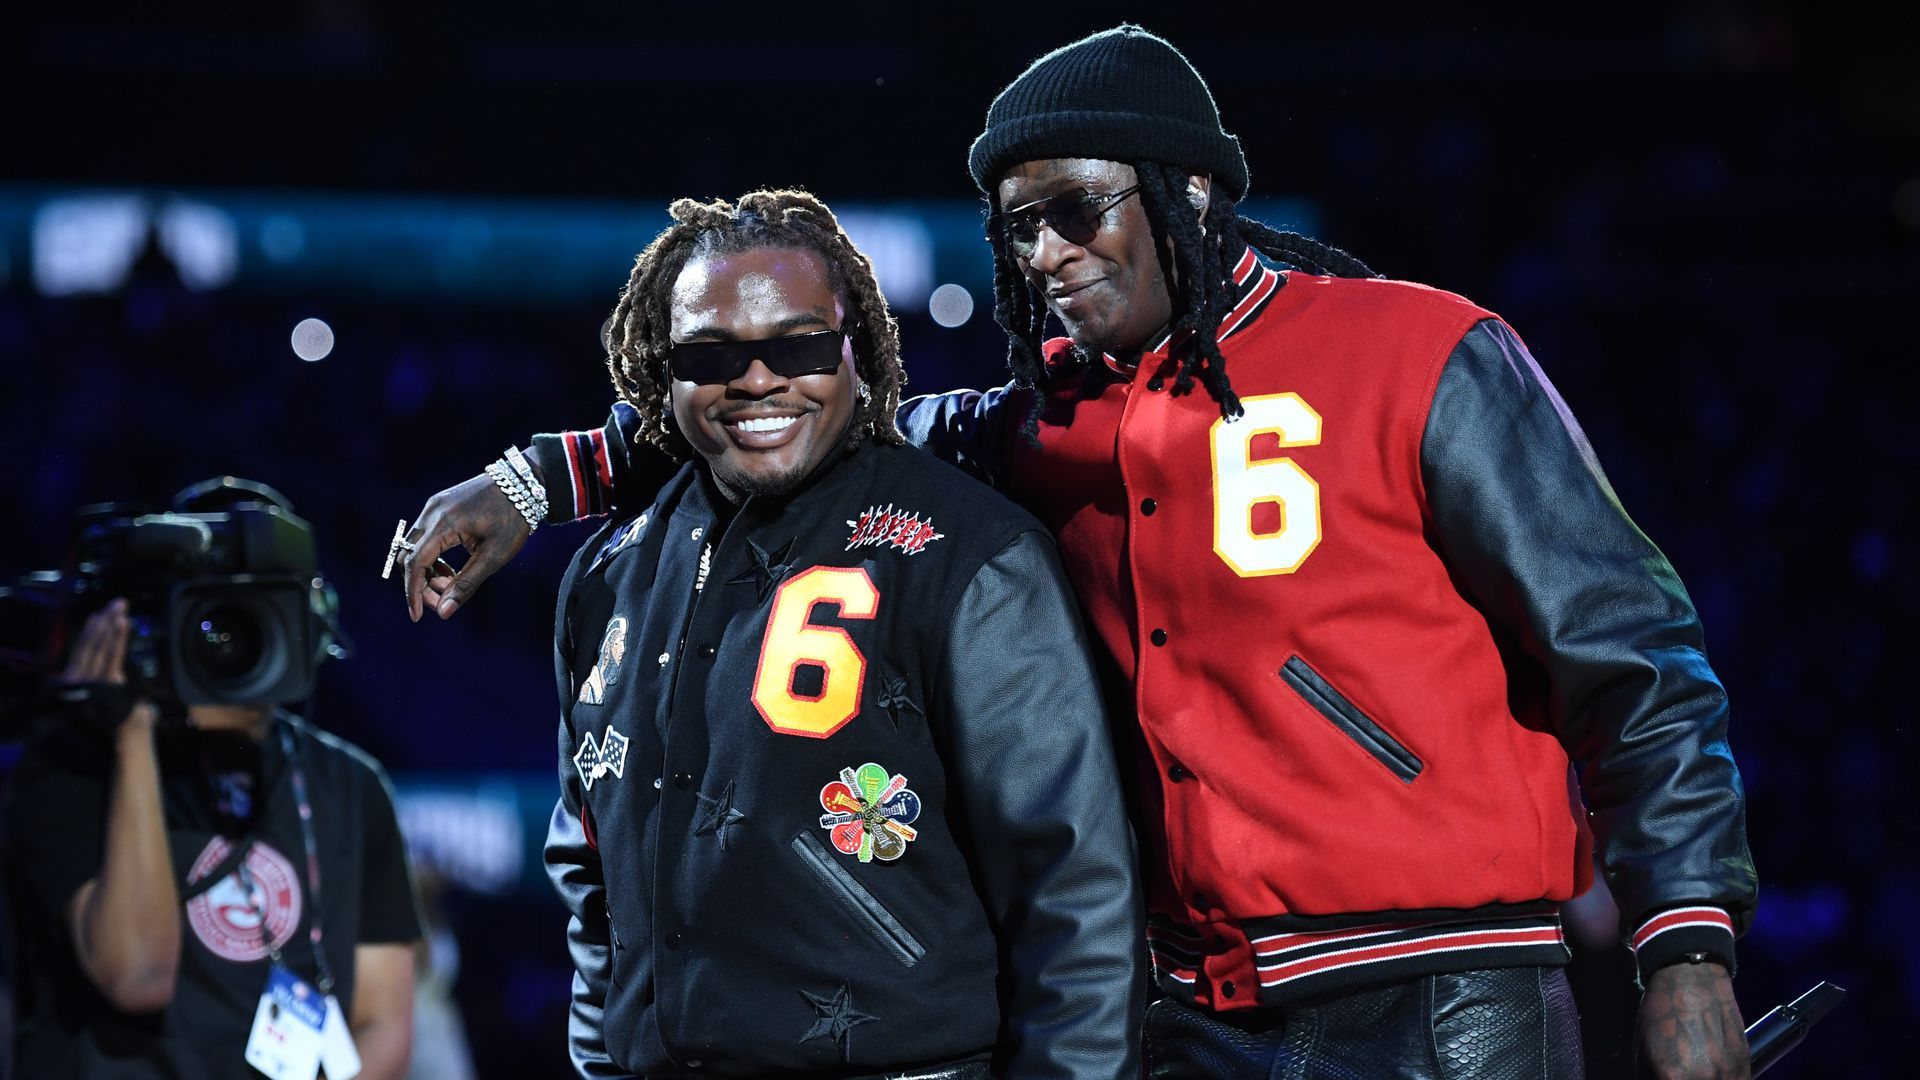 Gunna (left) and Young Thug perform at an Atlanta Hawks  game in November 2021 at State Farm Arena. They were arrested last May. Photo: Adam Hagy/NBAE via Getty Images